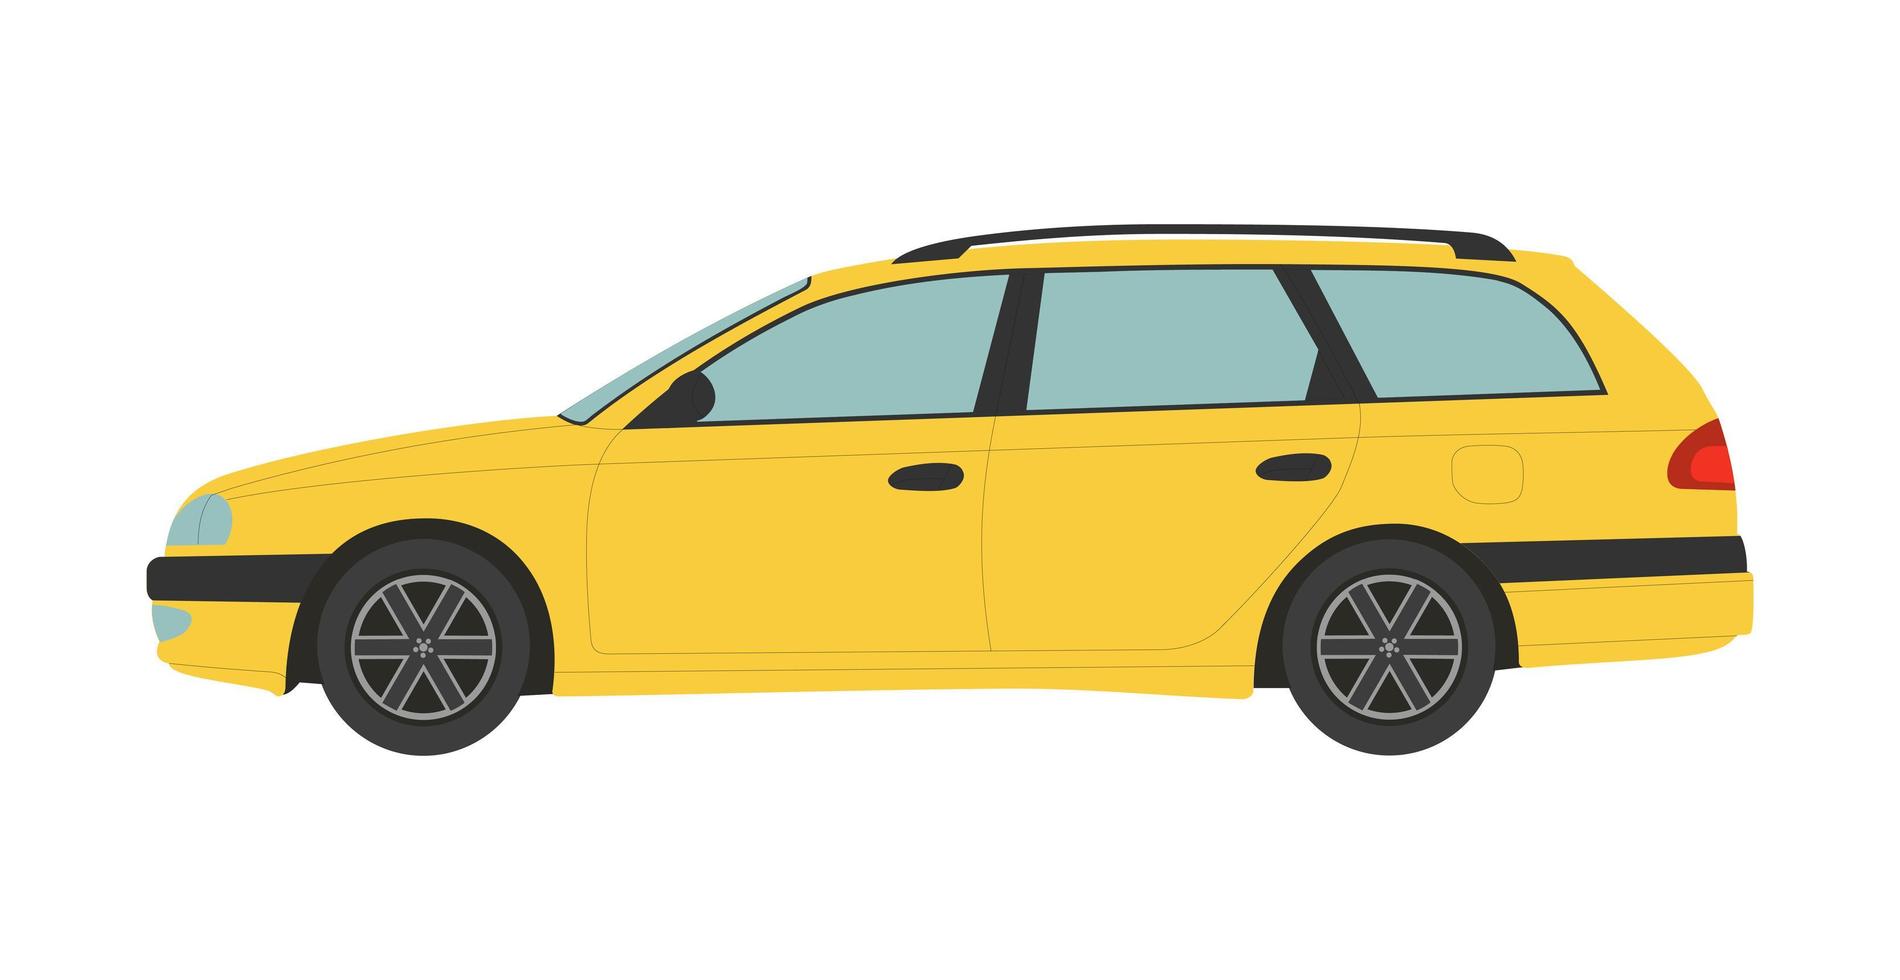 Yellow transport station wagon on a white background - Vector